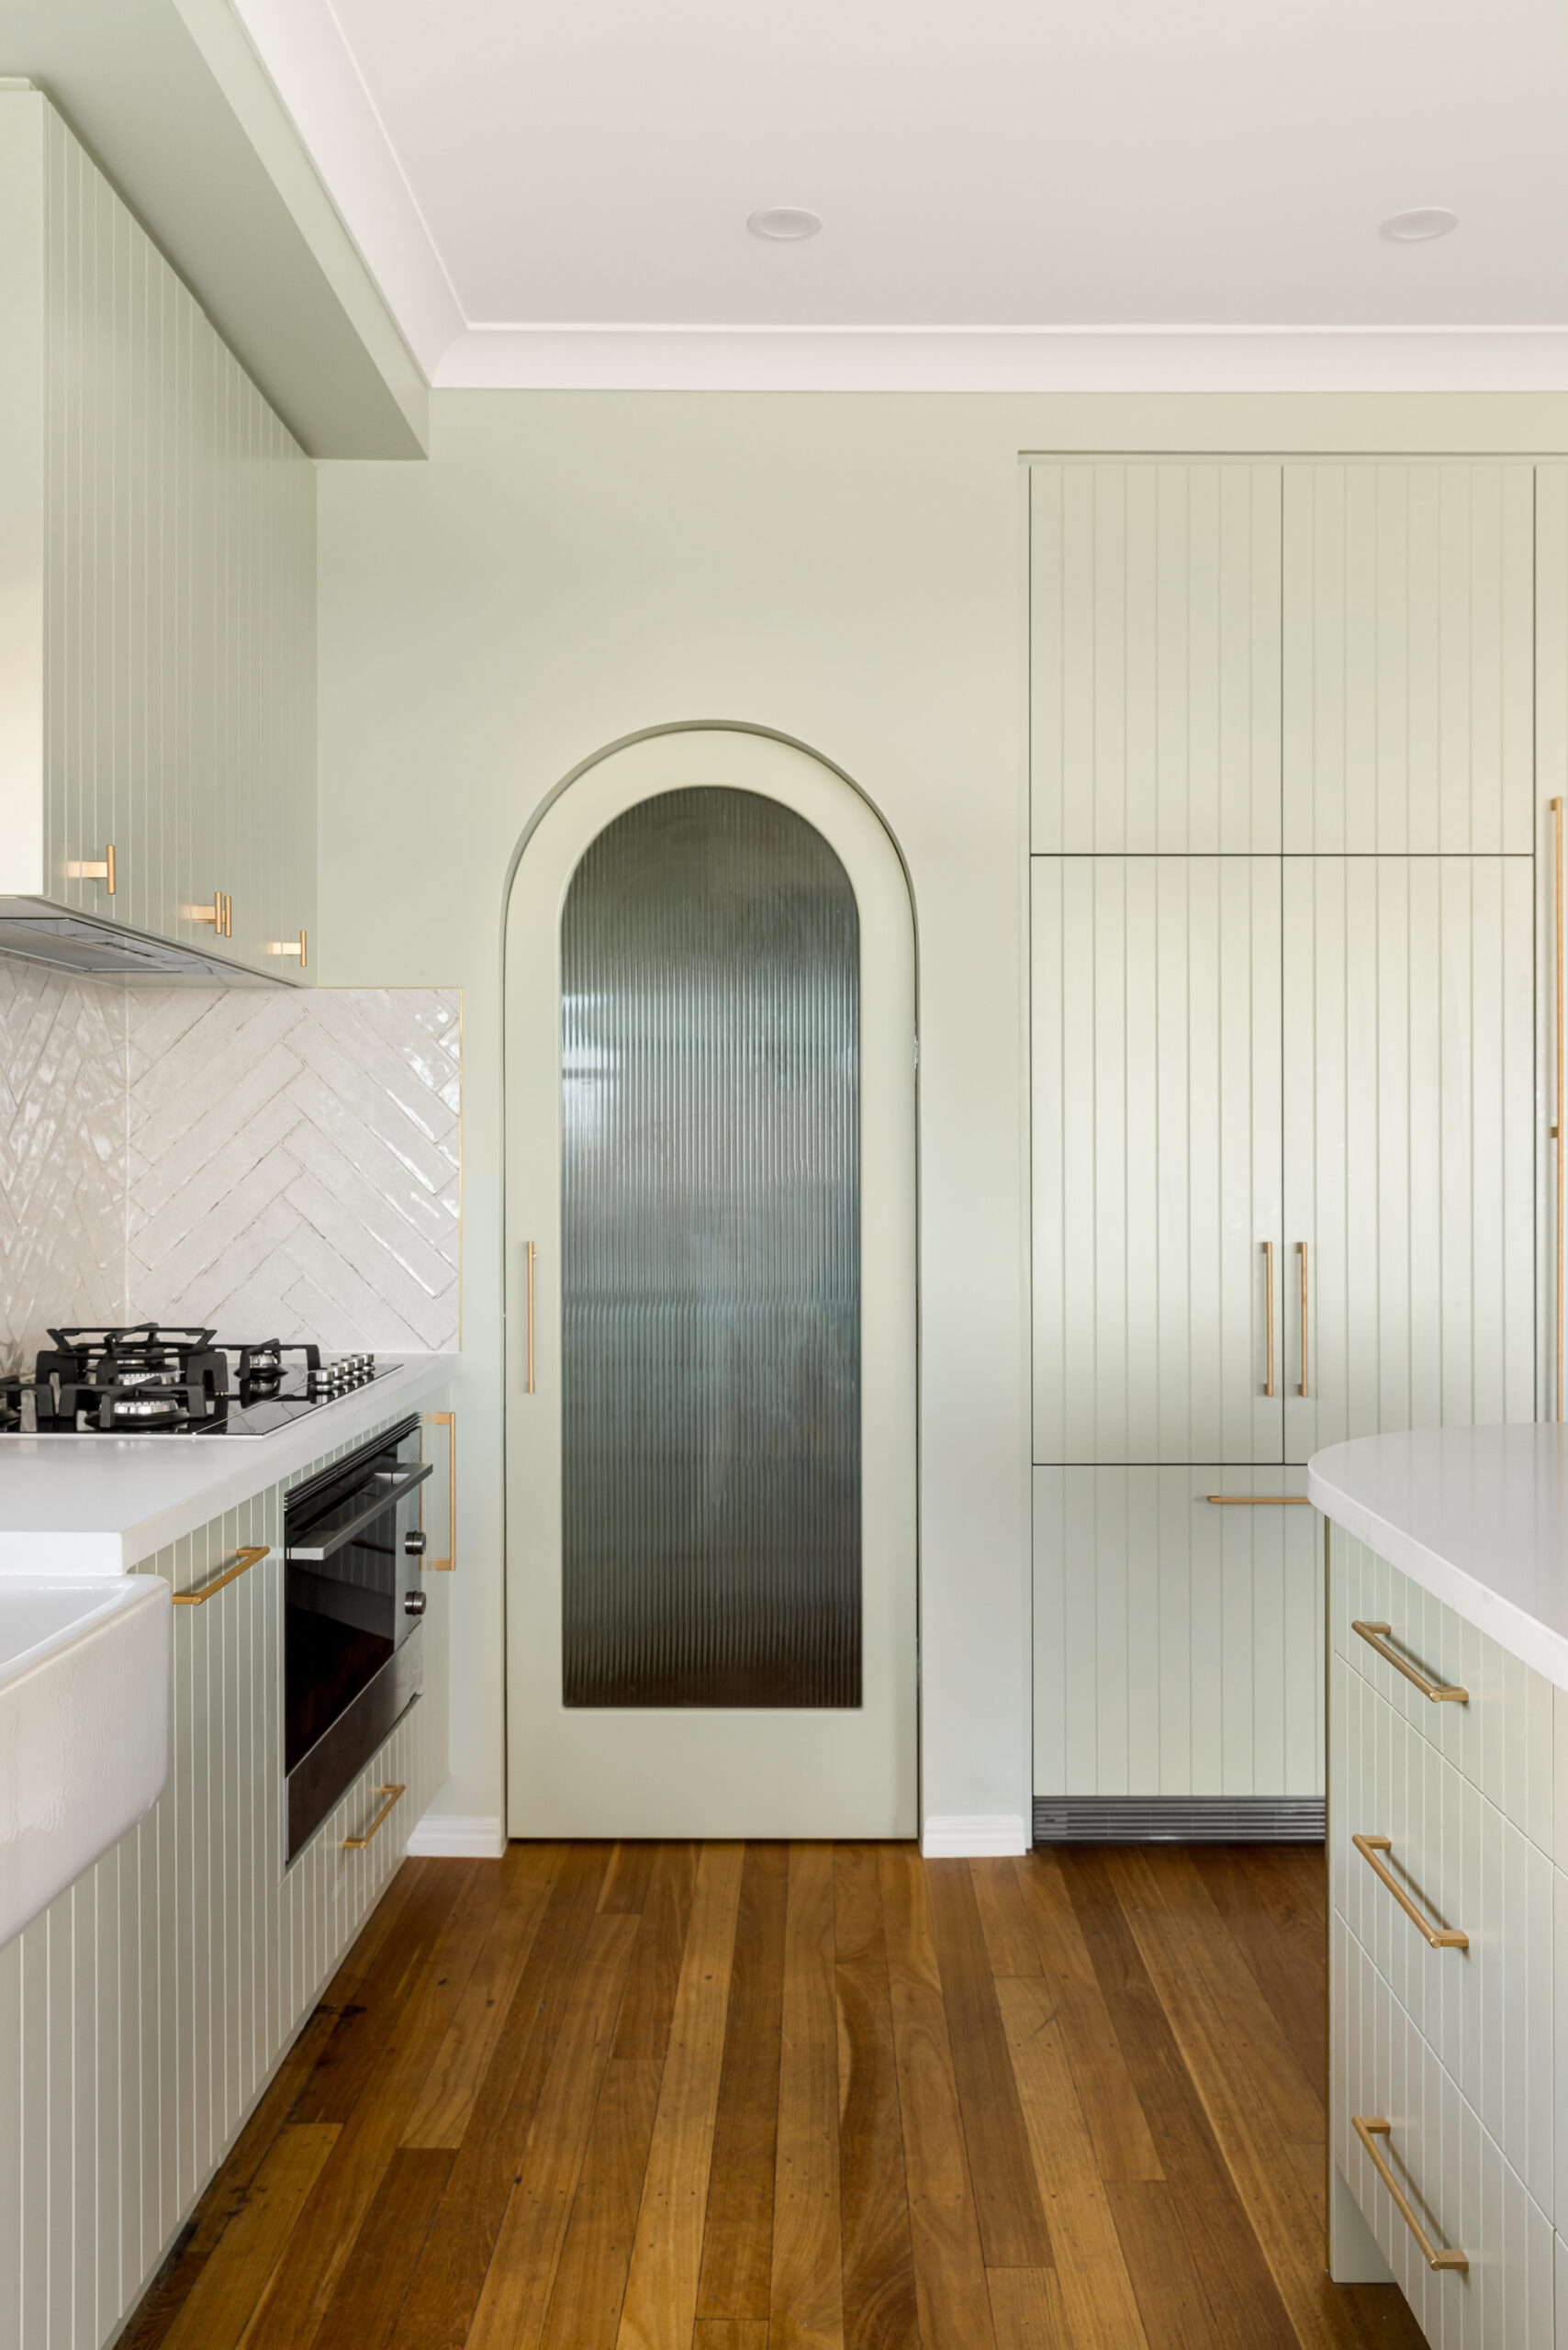 A modern kitchen after renovation with an arched door filled with textured glass